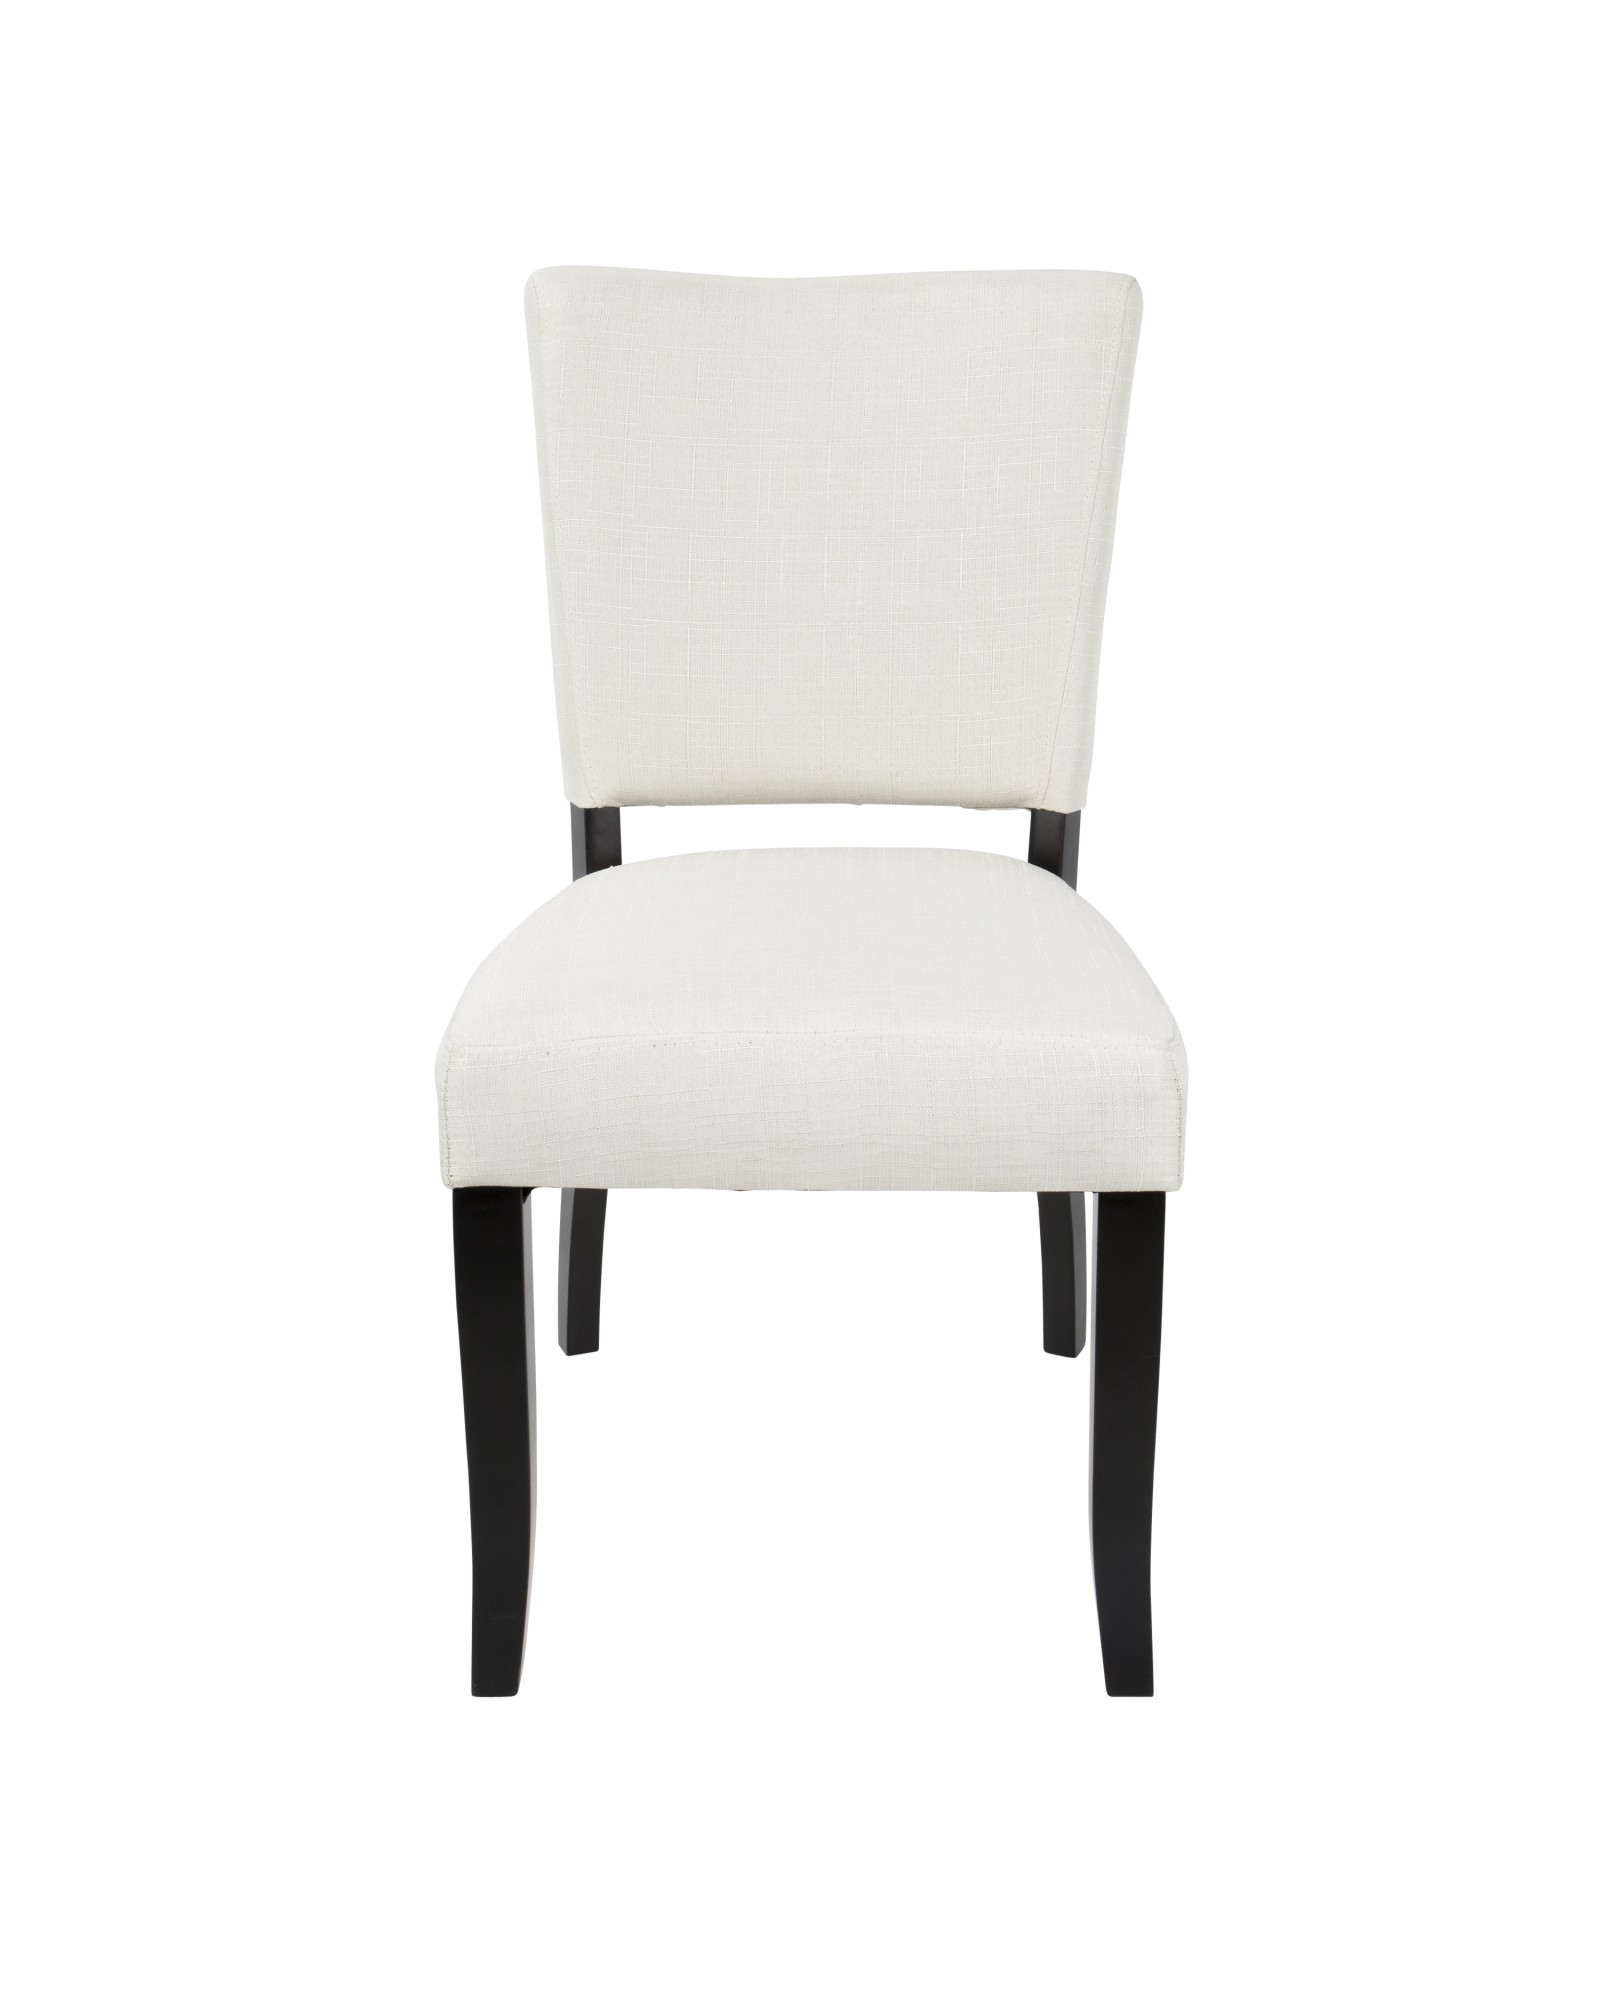 Vida Contemporary Dining Chair with Nailhead Trim in Espresso and Cream - Set of 2